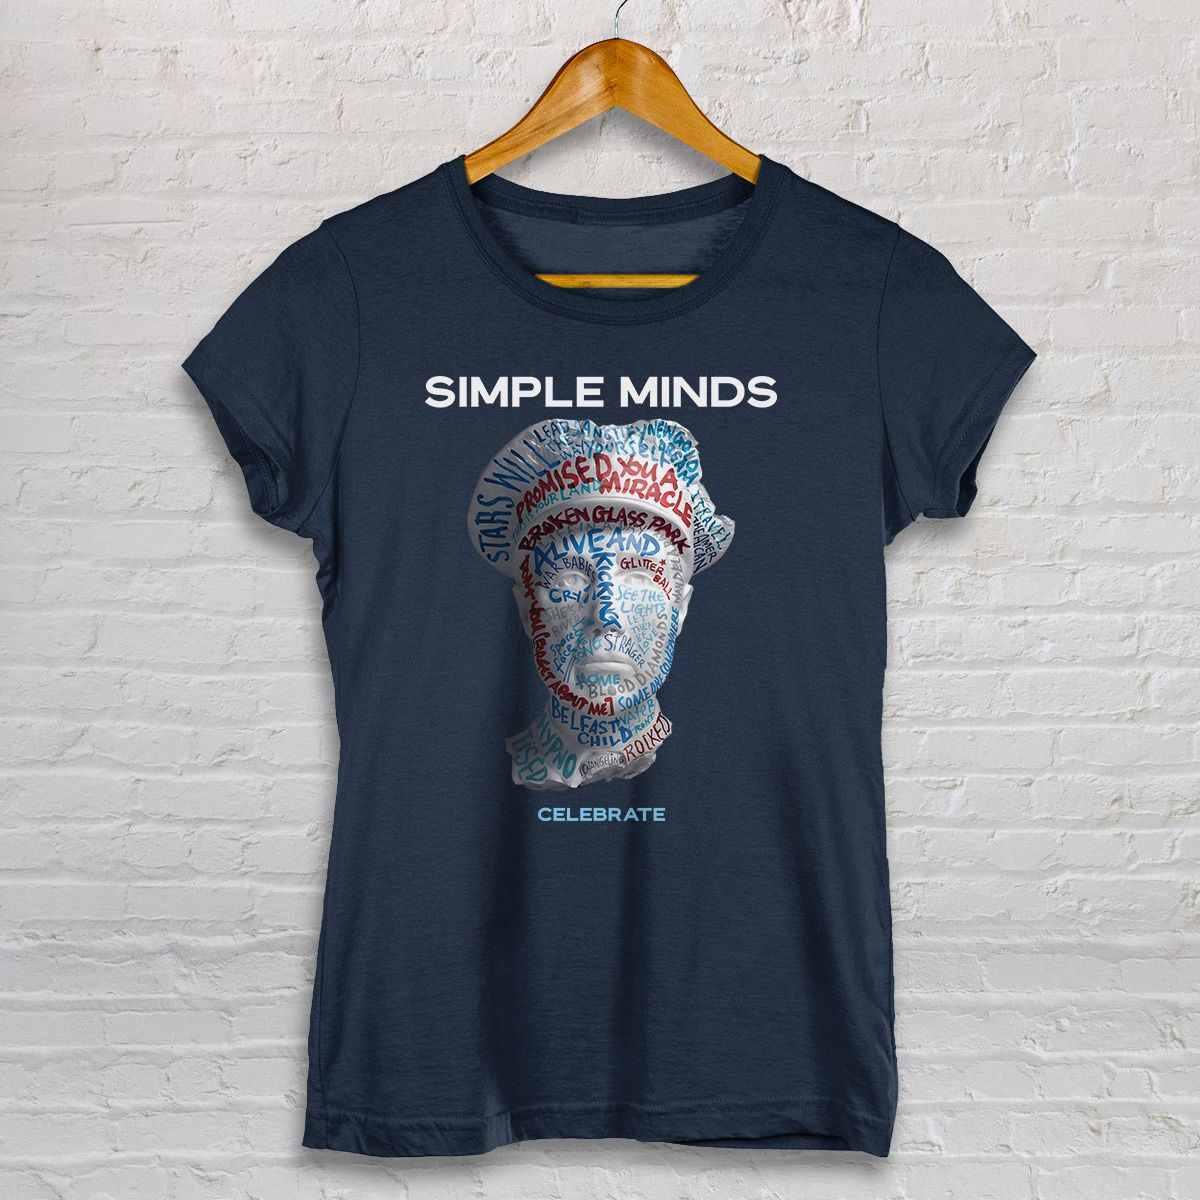 Nome do produto: BABY LOOK - SIMPLE MINDS - CELEBRATE